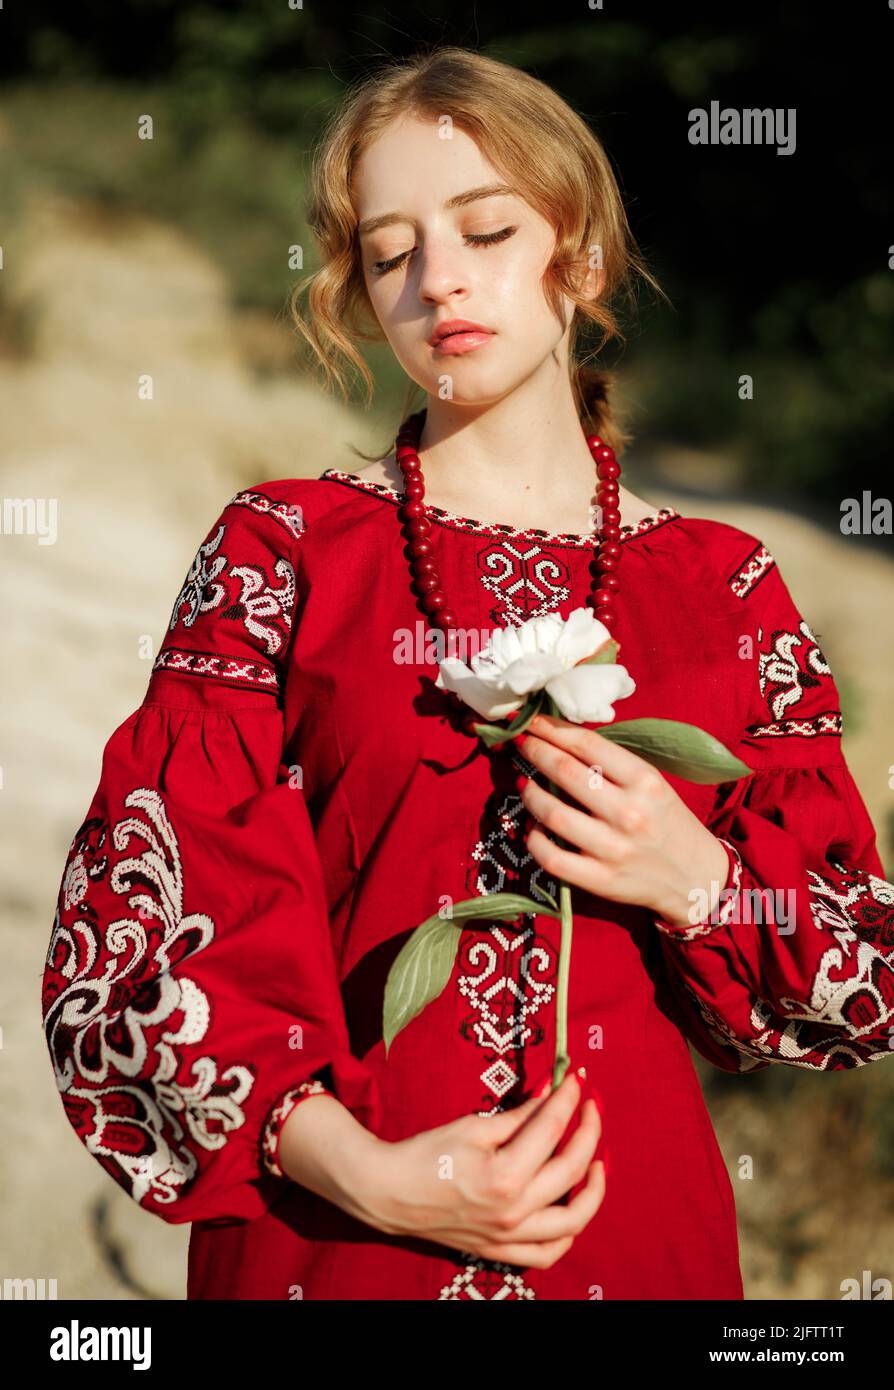 A beautiful girl in a traditional ethnic red dress posing outdoors with a white peony flower in her hand Stock Photo